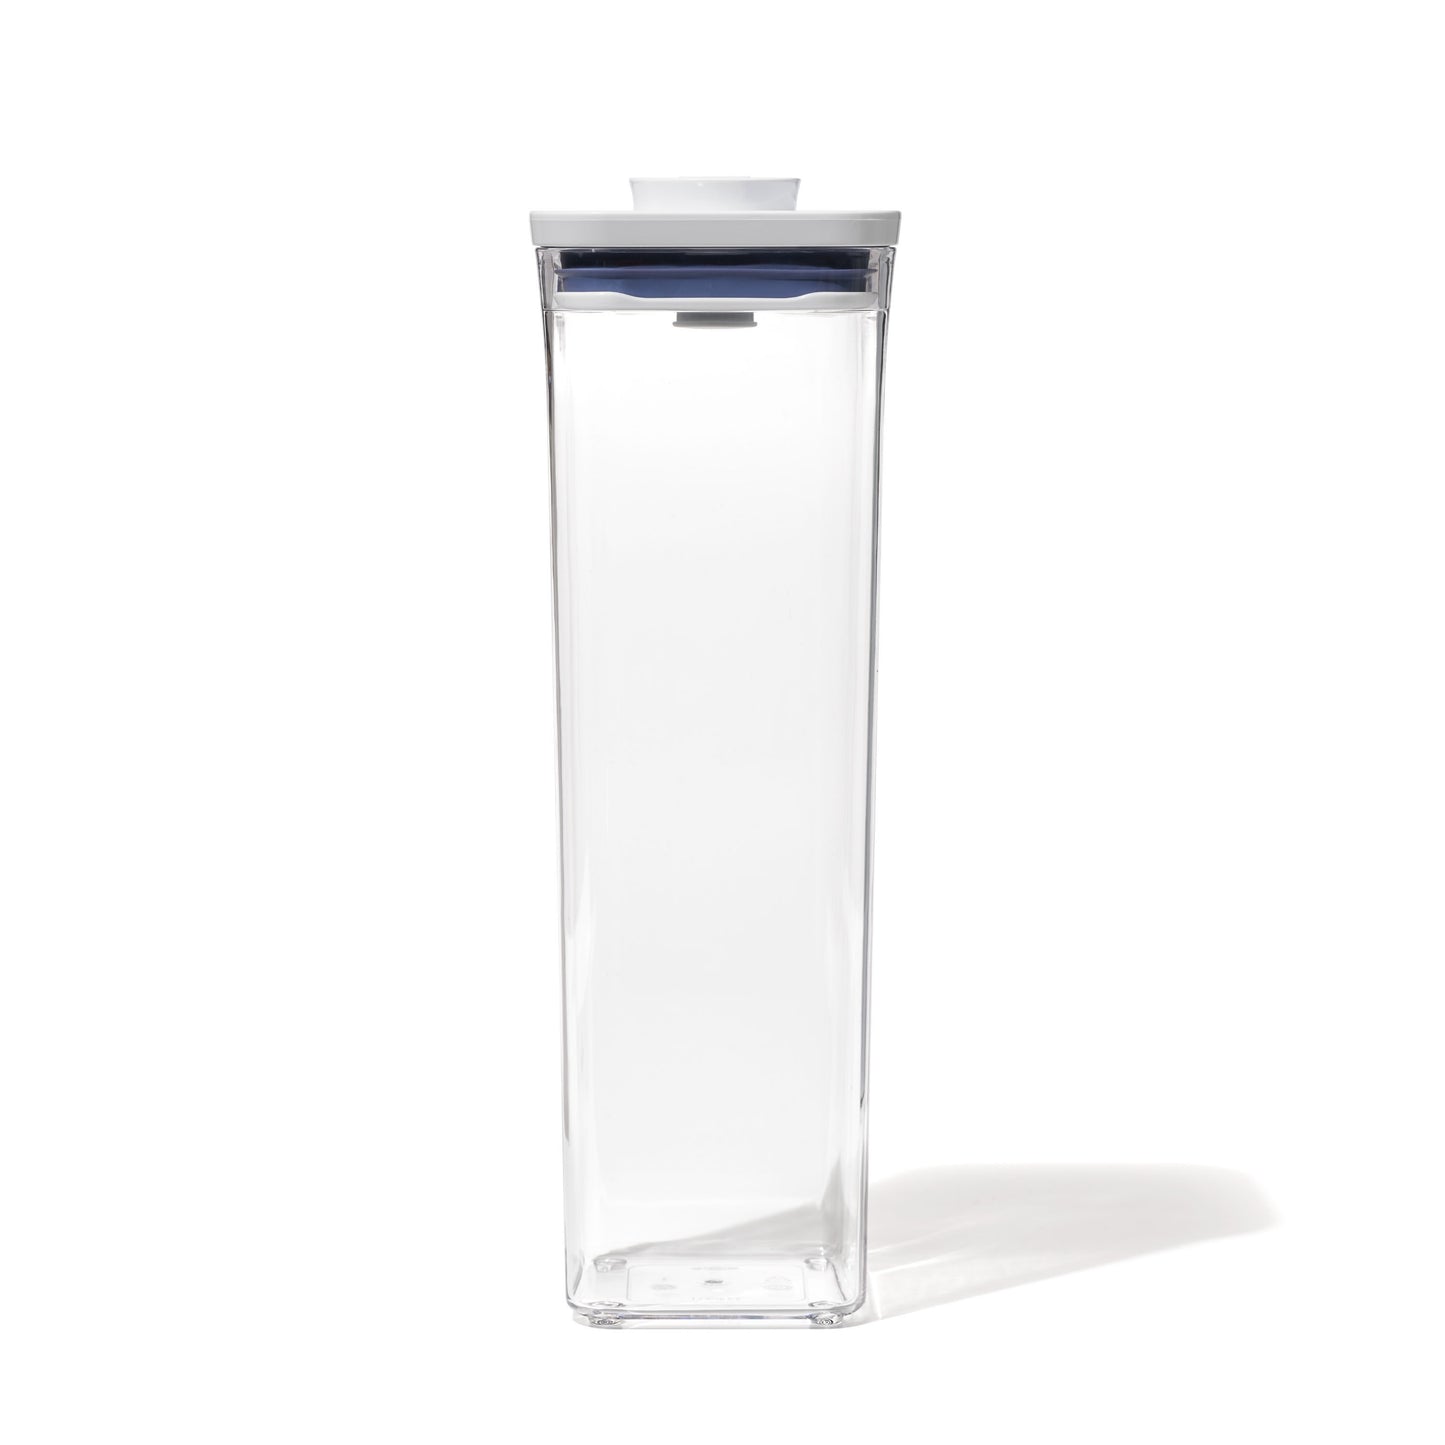 OXO POP Container Small Square Tall 2.1L